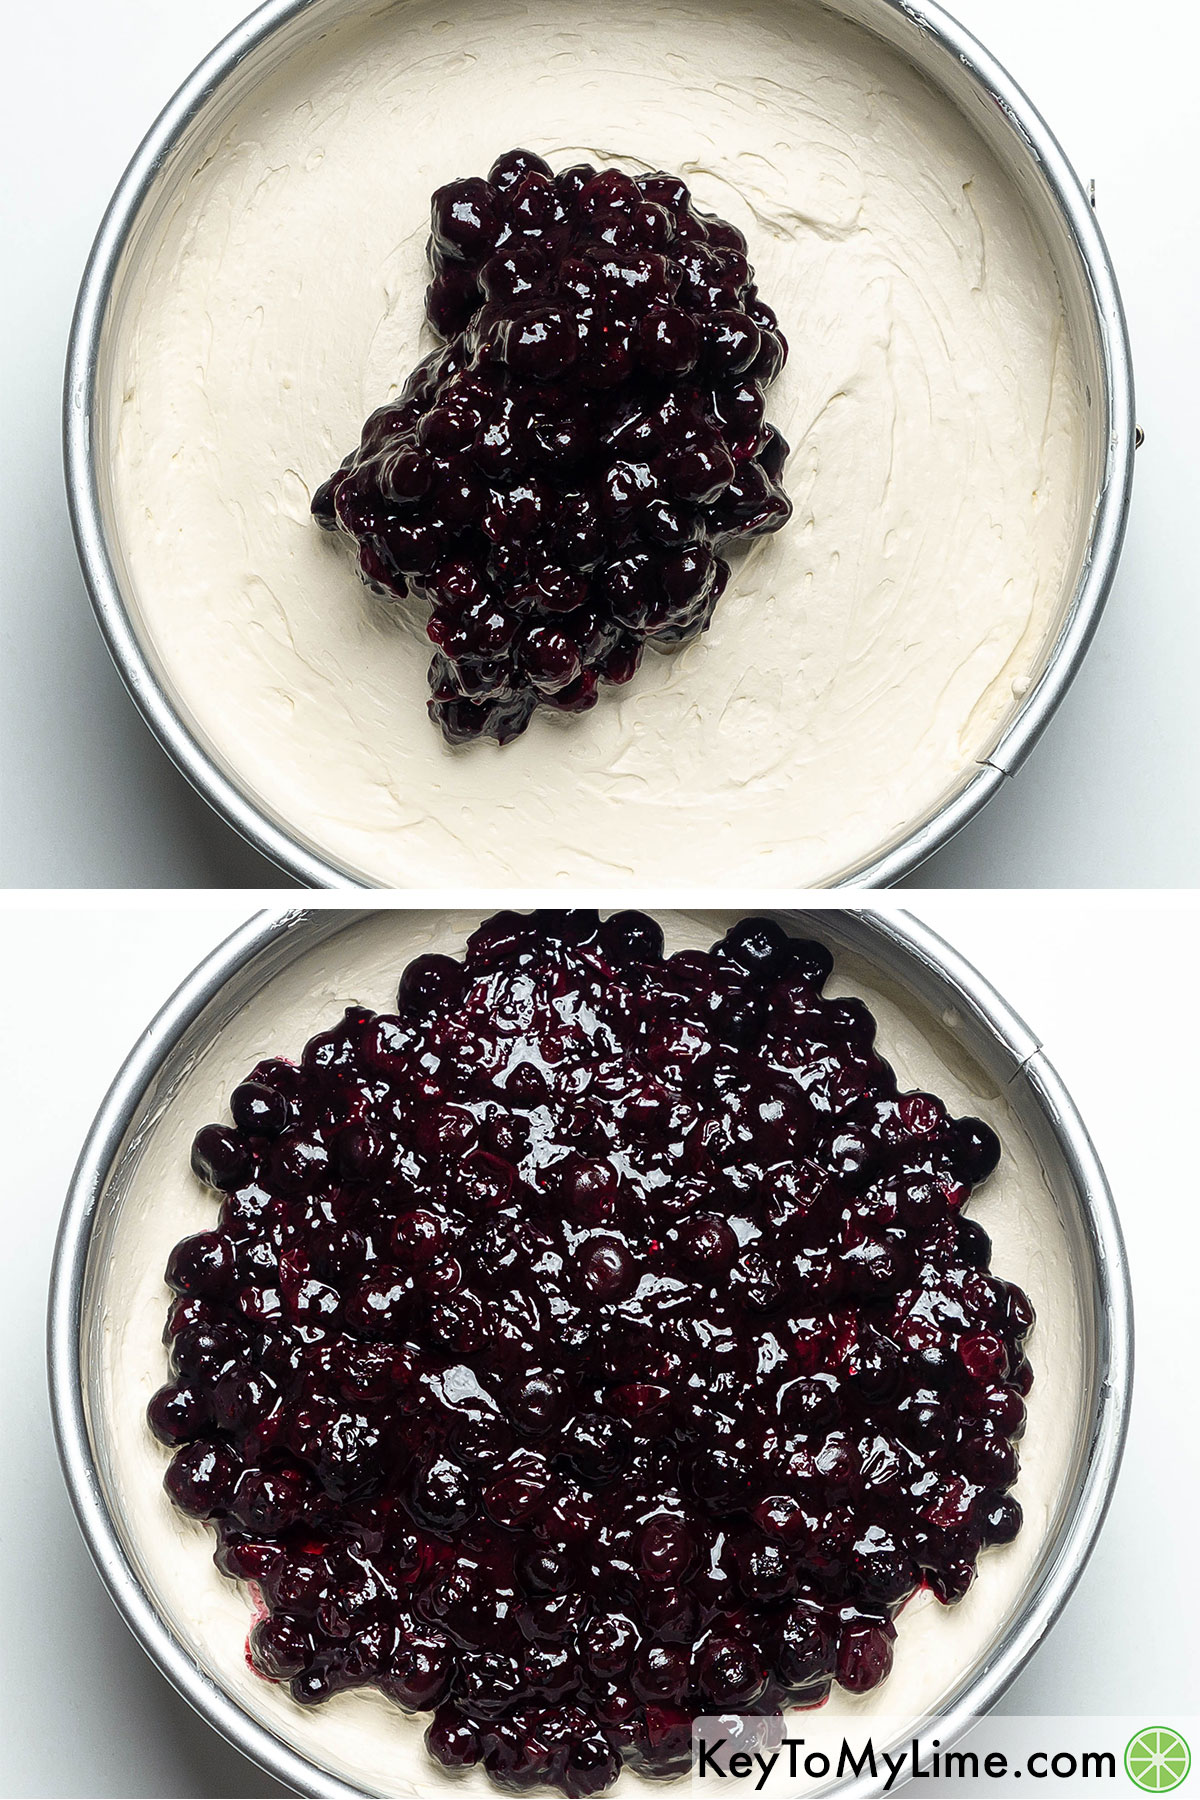 Adding the cooled berries to the top of the cheesecake, and then spreading out evenly.